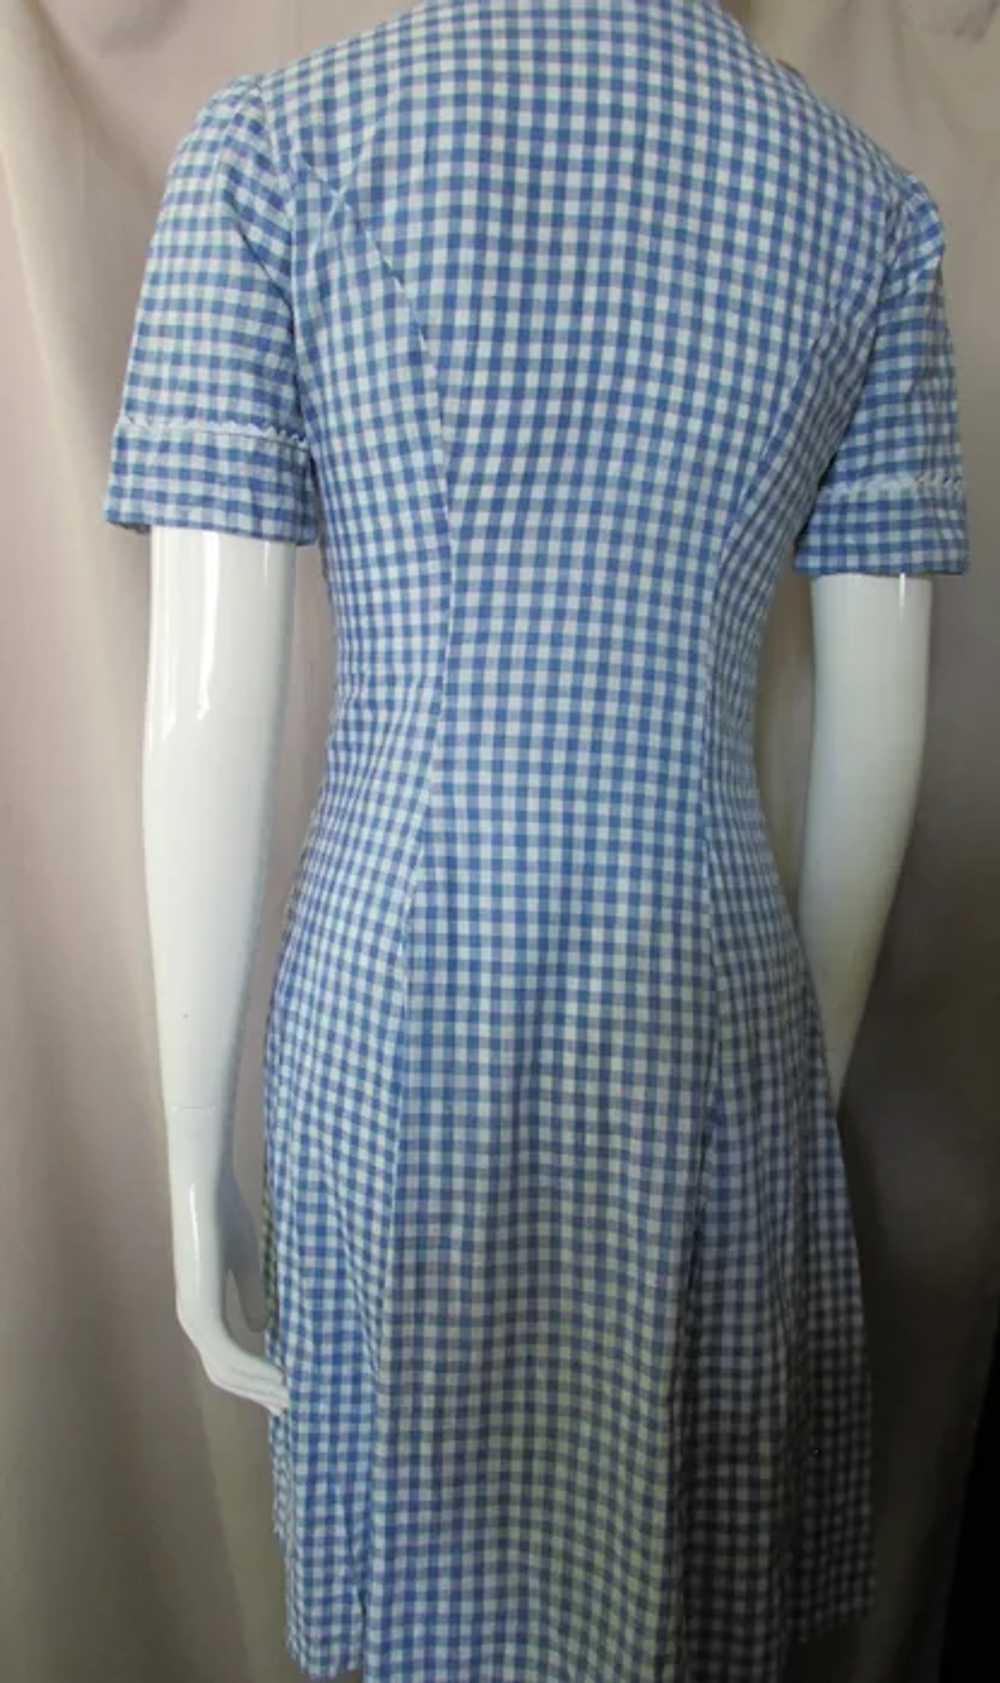 SALE Cutest Vintage Day Dress White & Blue Gingha… - image 7